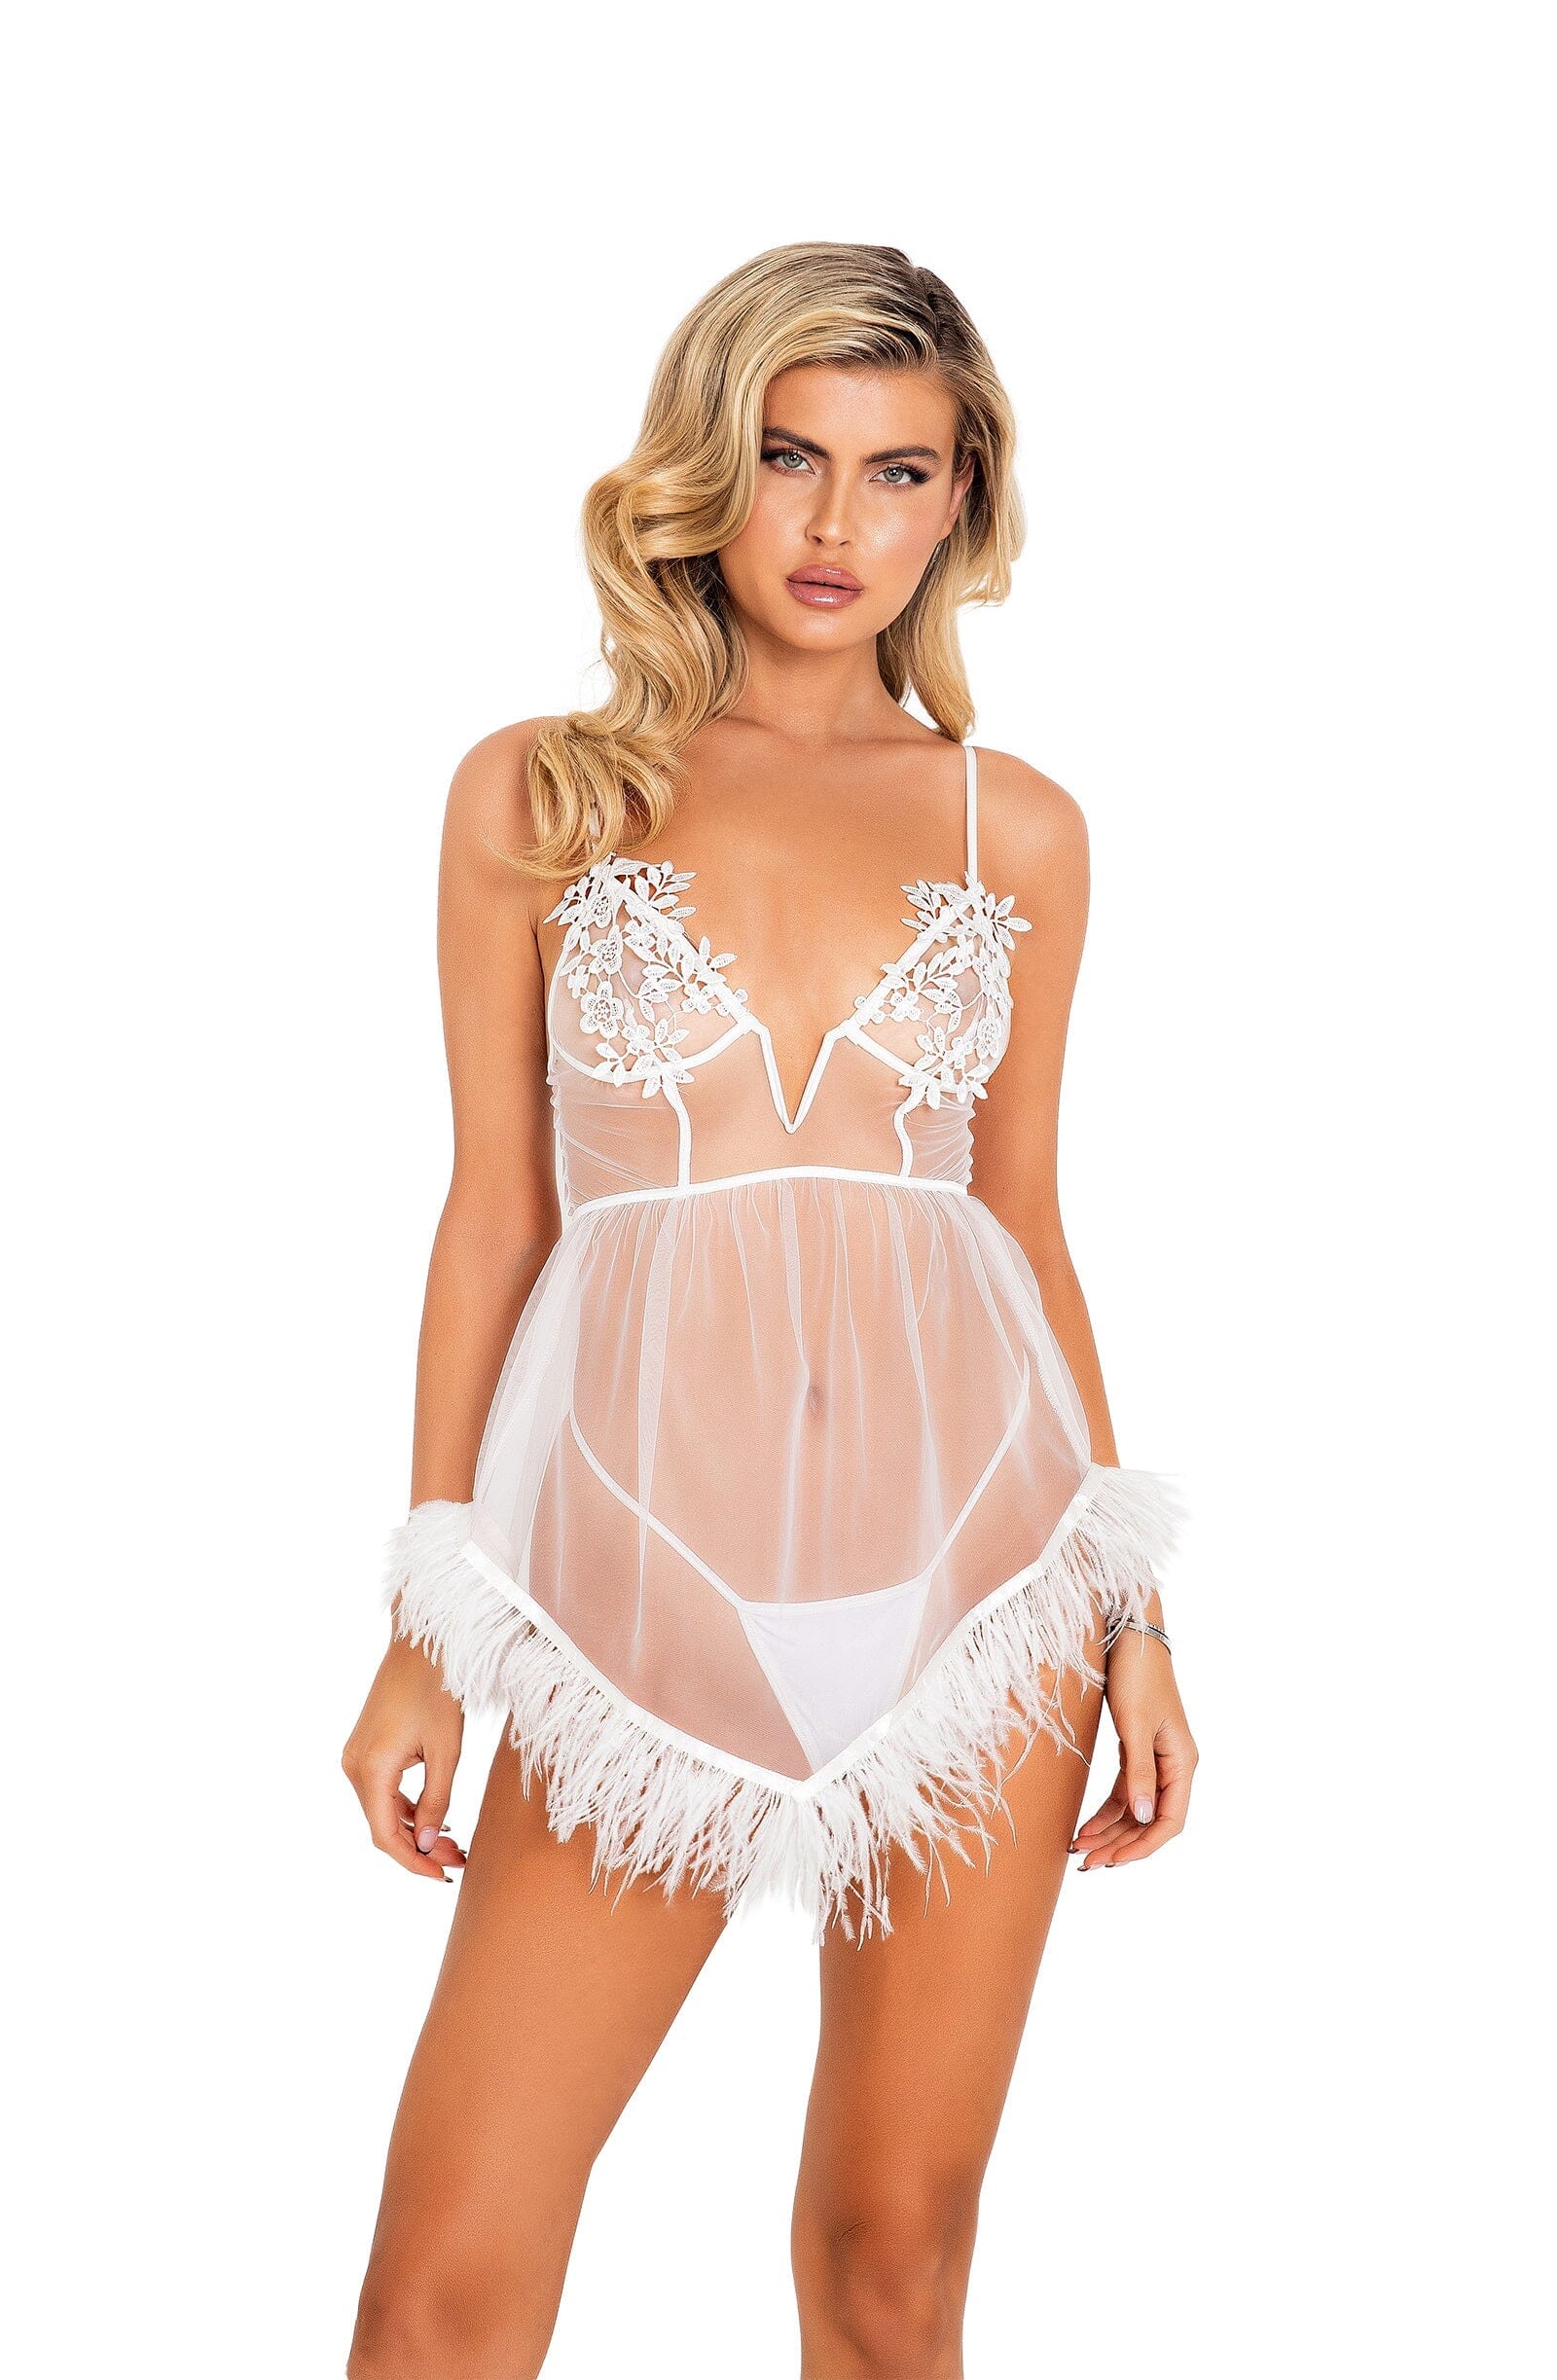 LI450 - 2pc Bridal Corset Chemise with Ostrich Feather Trim & Panty lingerie Exotic Peach Small White 